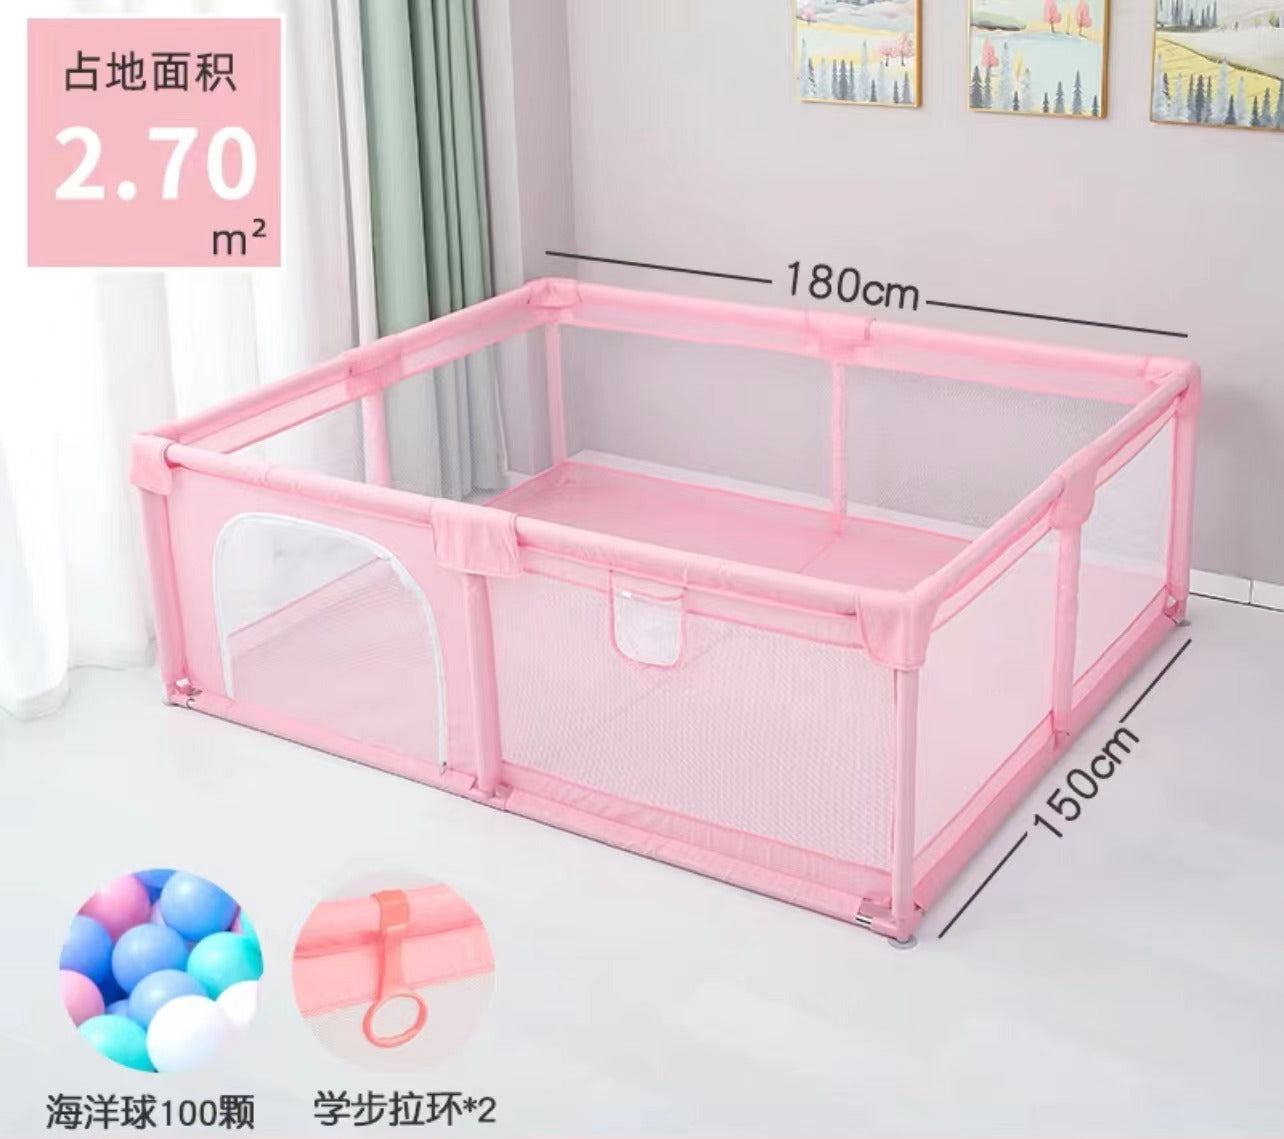 COOLBABY WL802 Children's play game fence Spacious and Secure Baby Playpen - COOL BABY